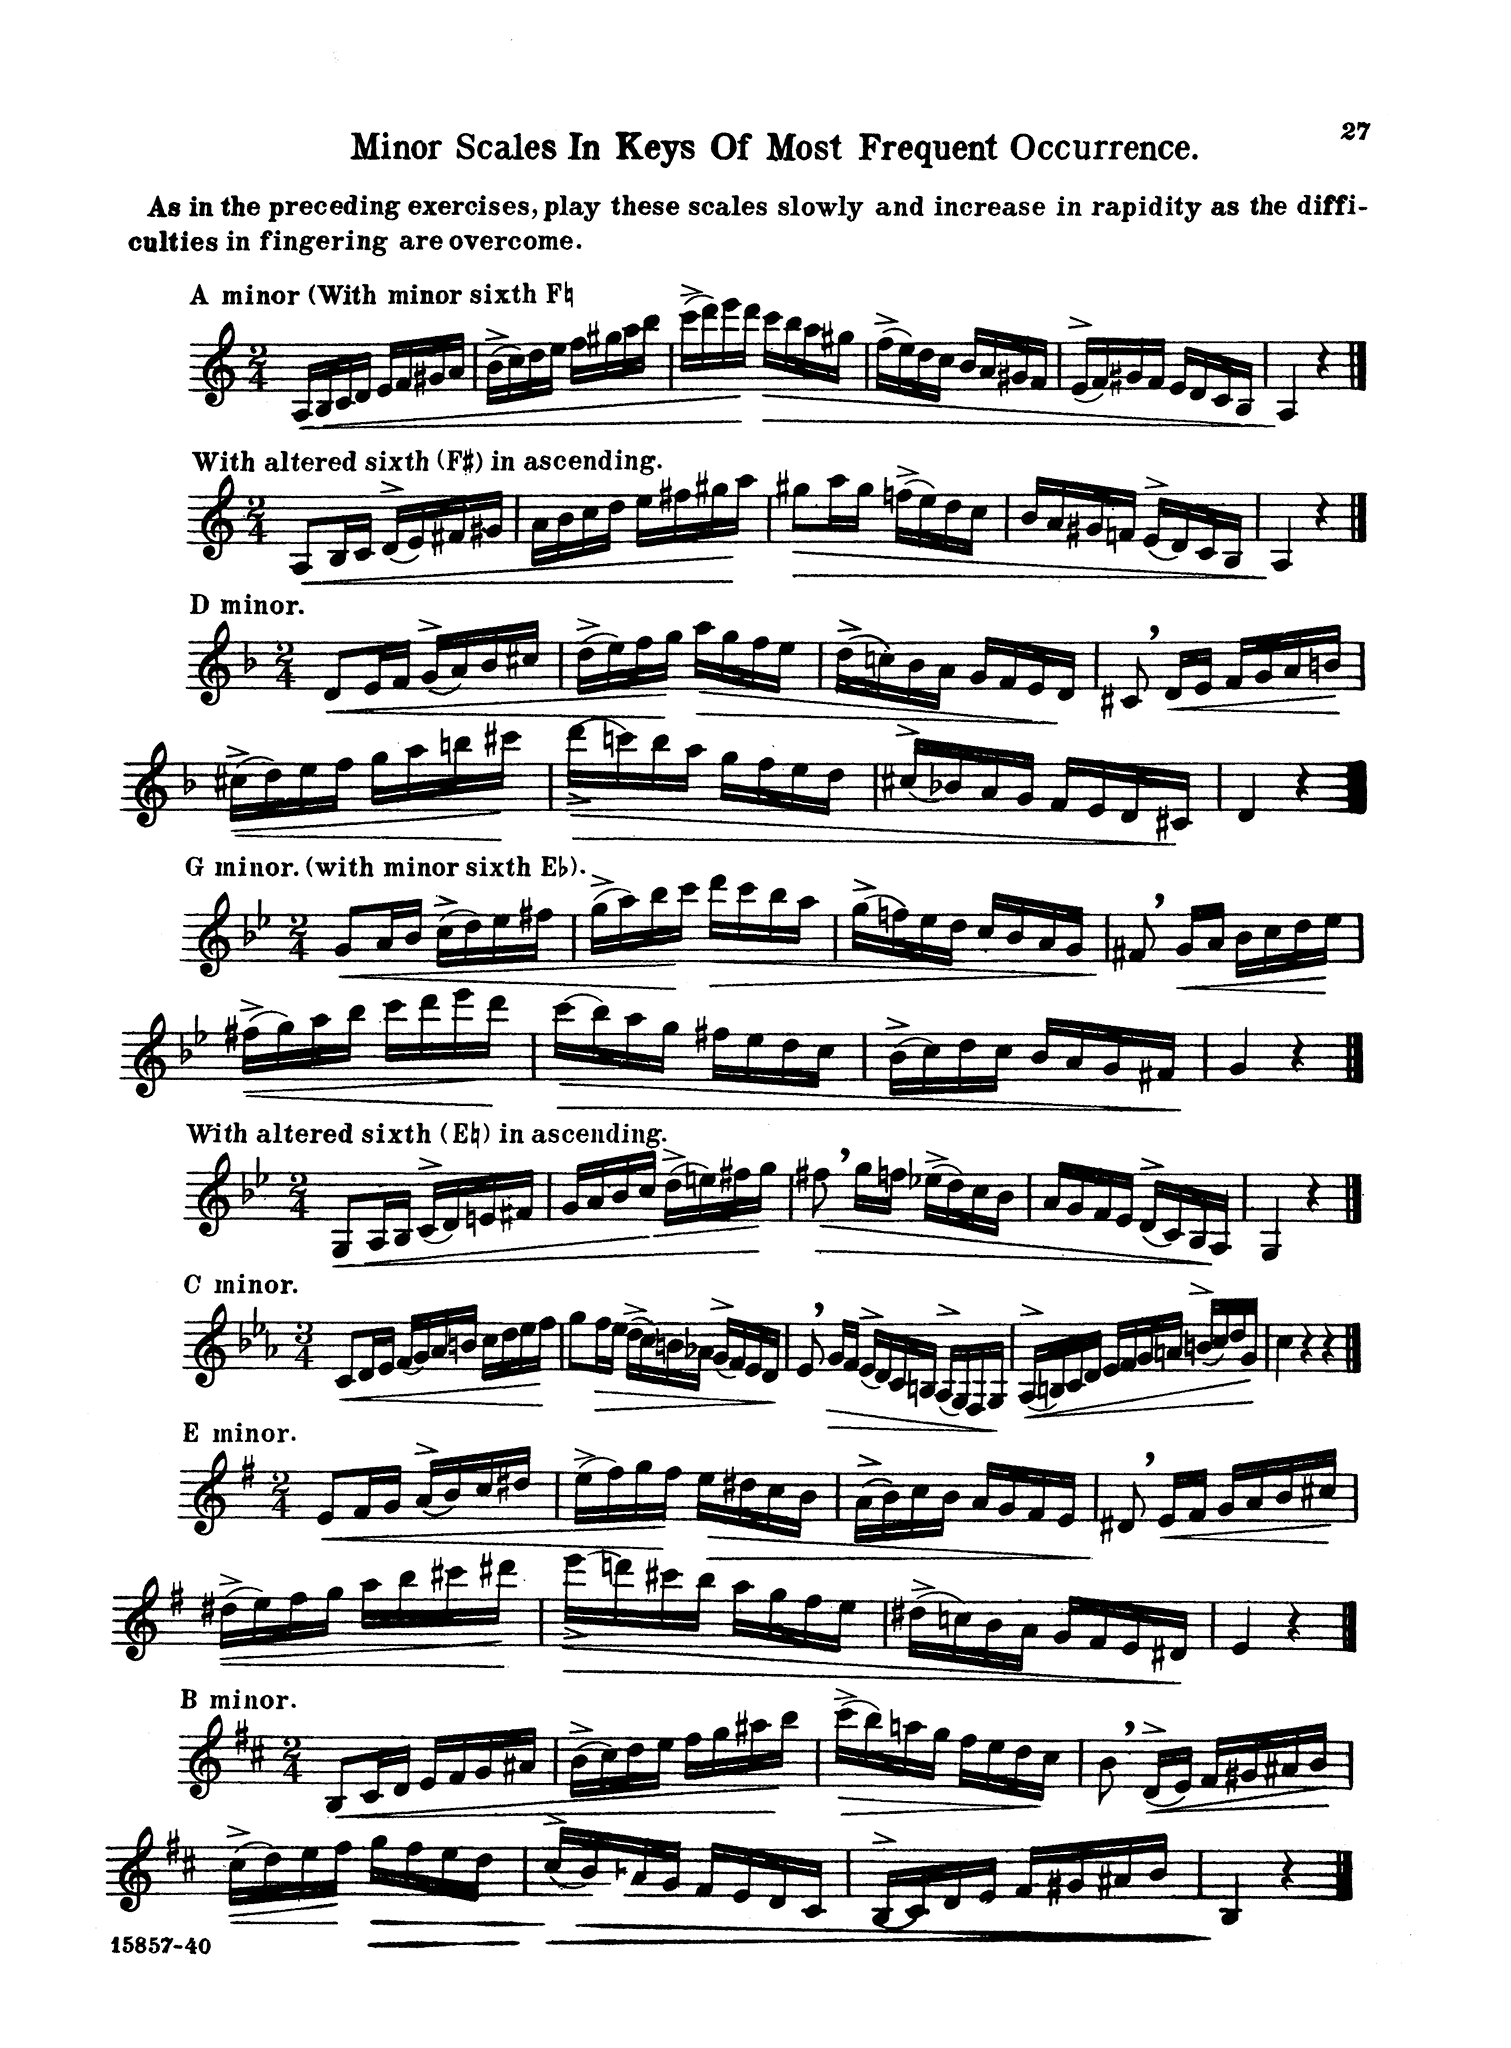 Parès Daily Exercises & Scales for Clarinet page 27